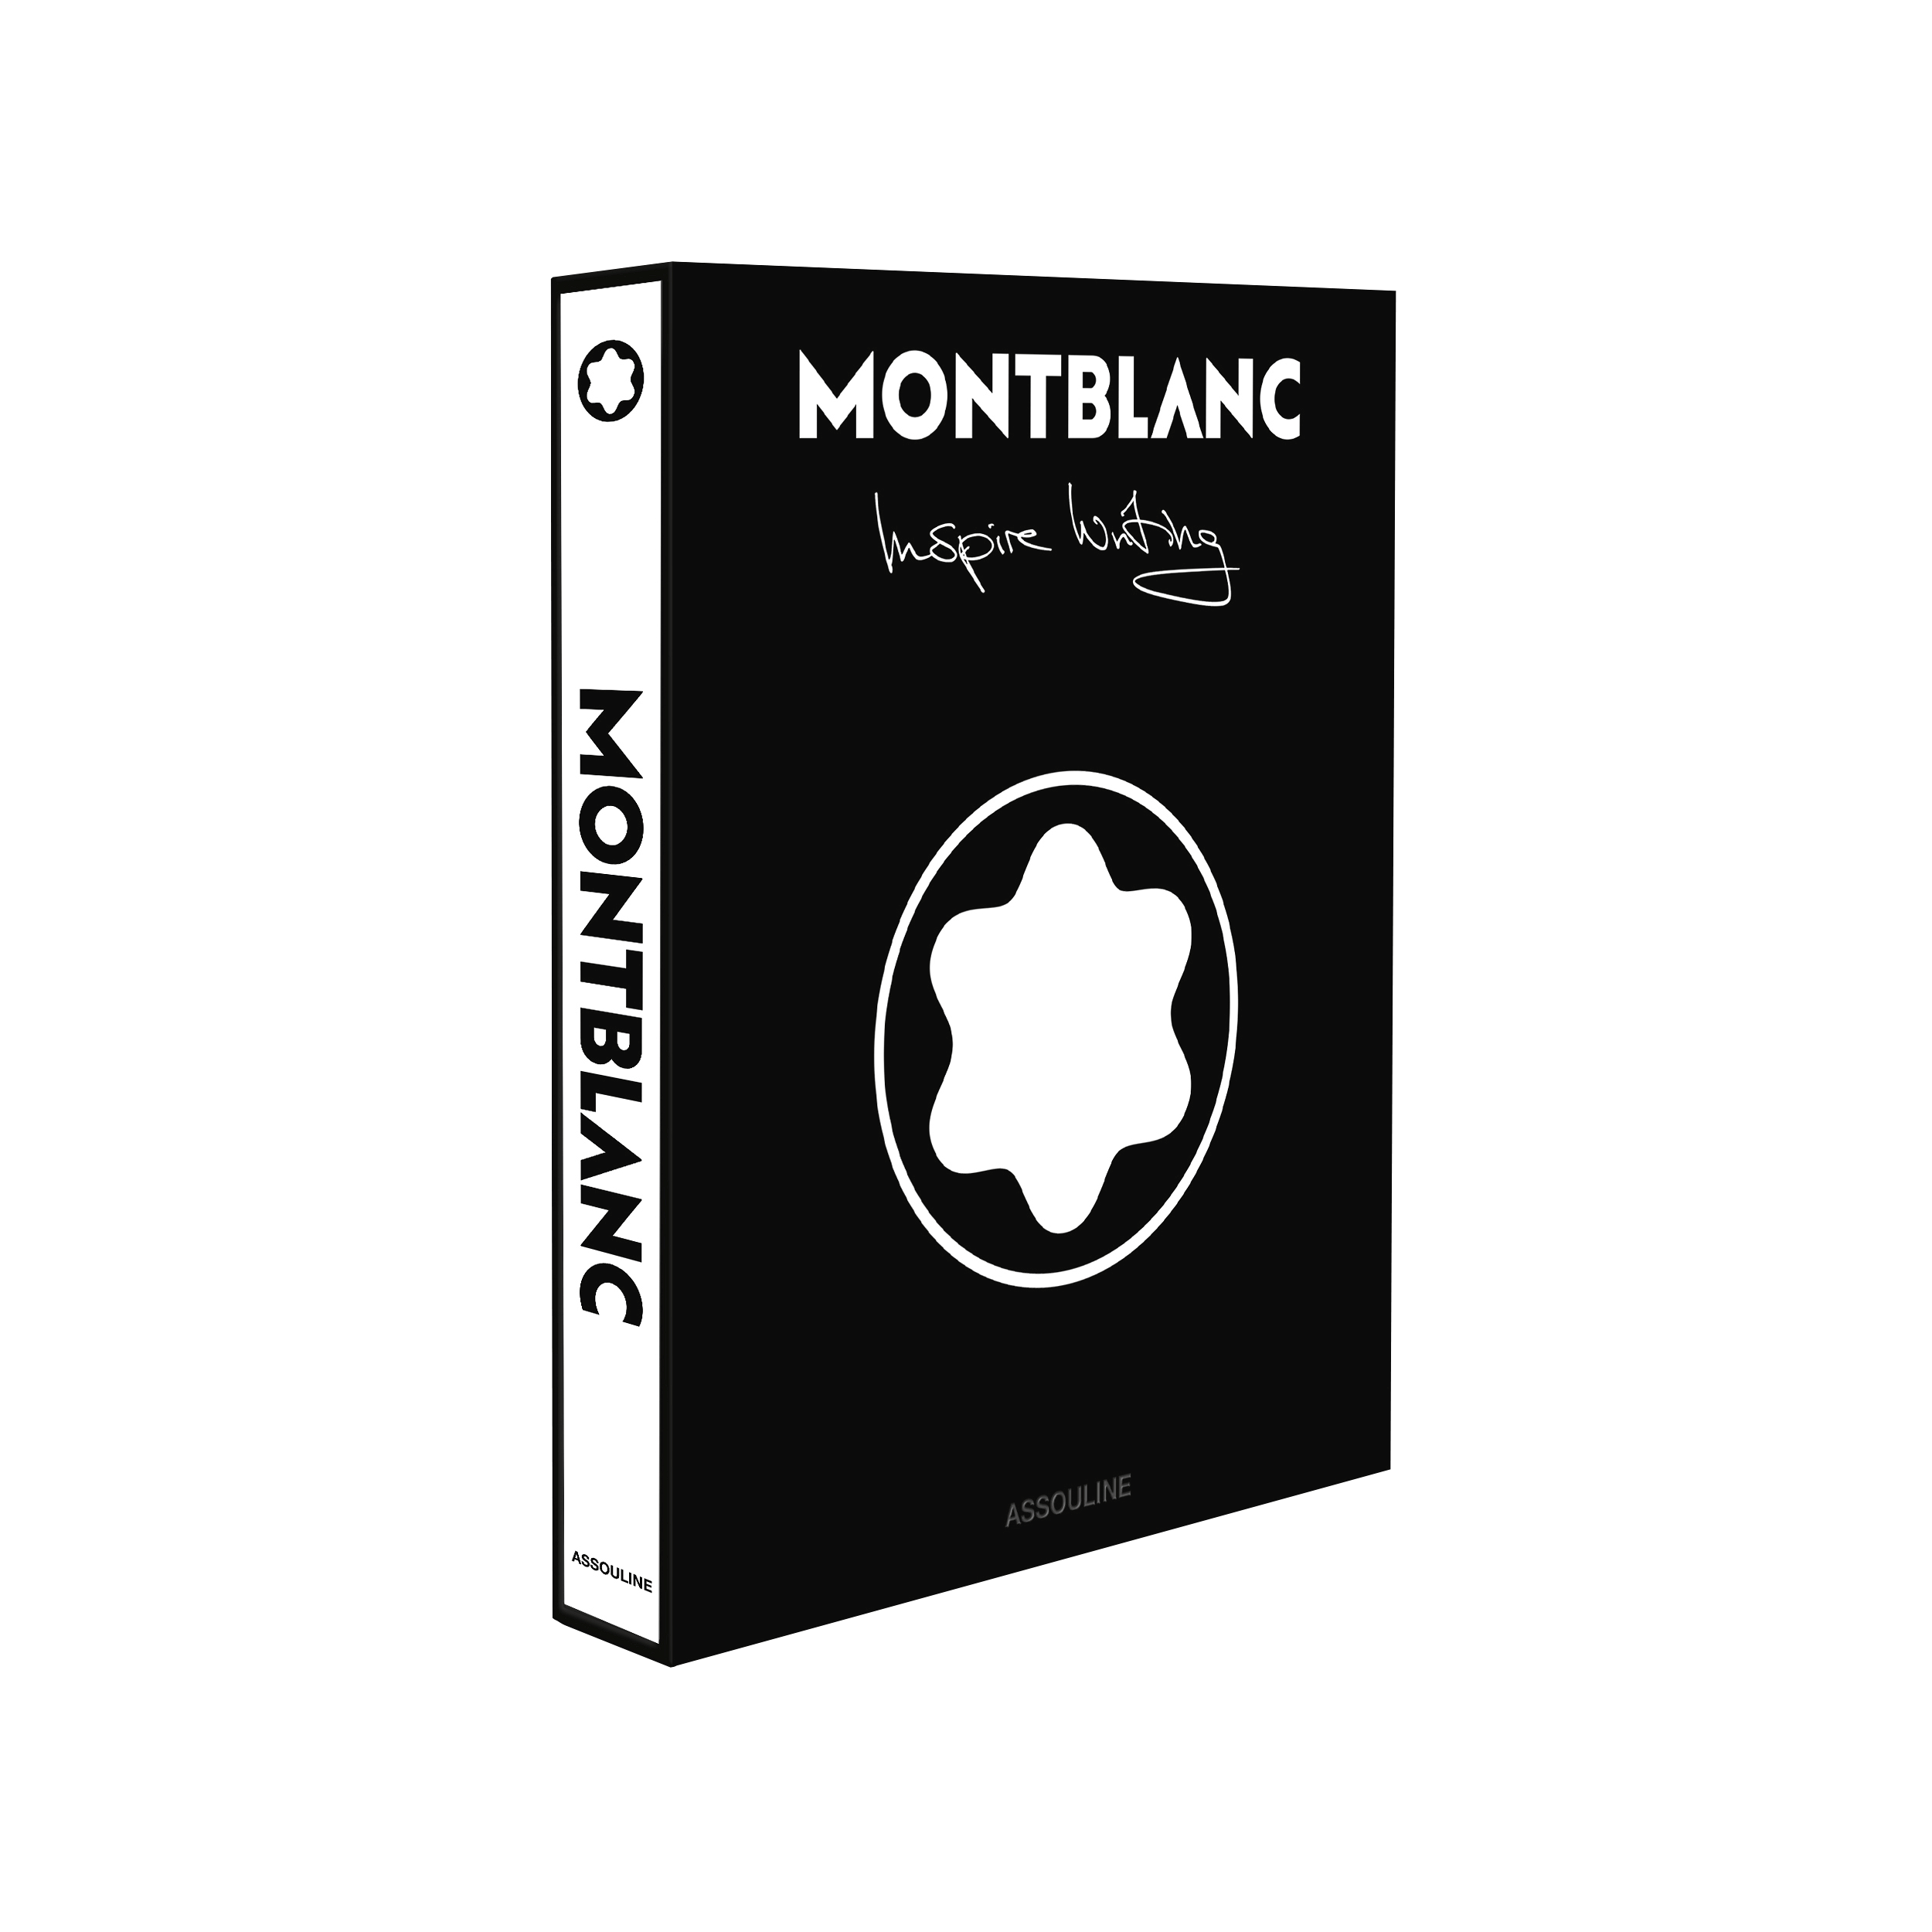 Montblanc Inspire Writing Coffee Table Book (English), image 5